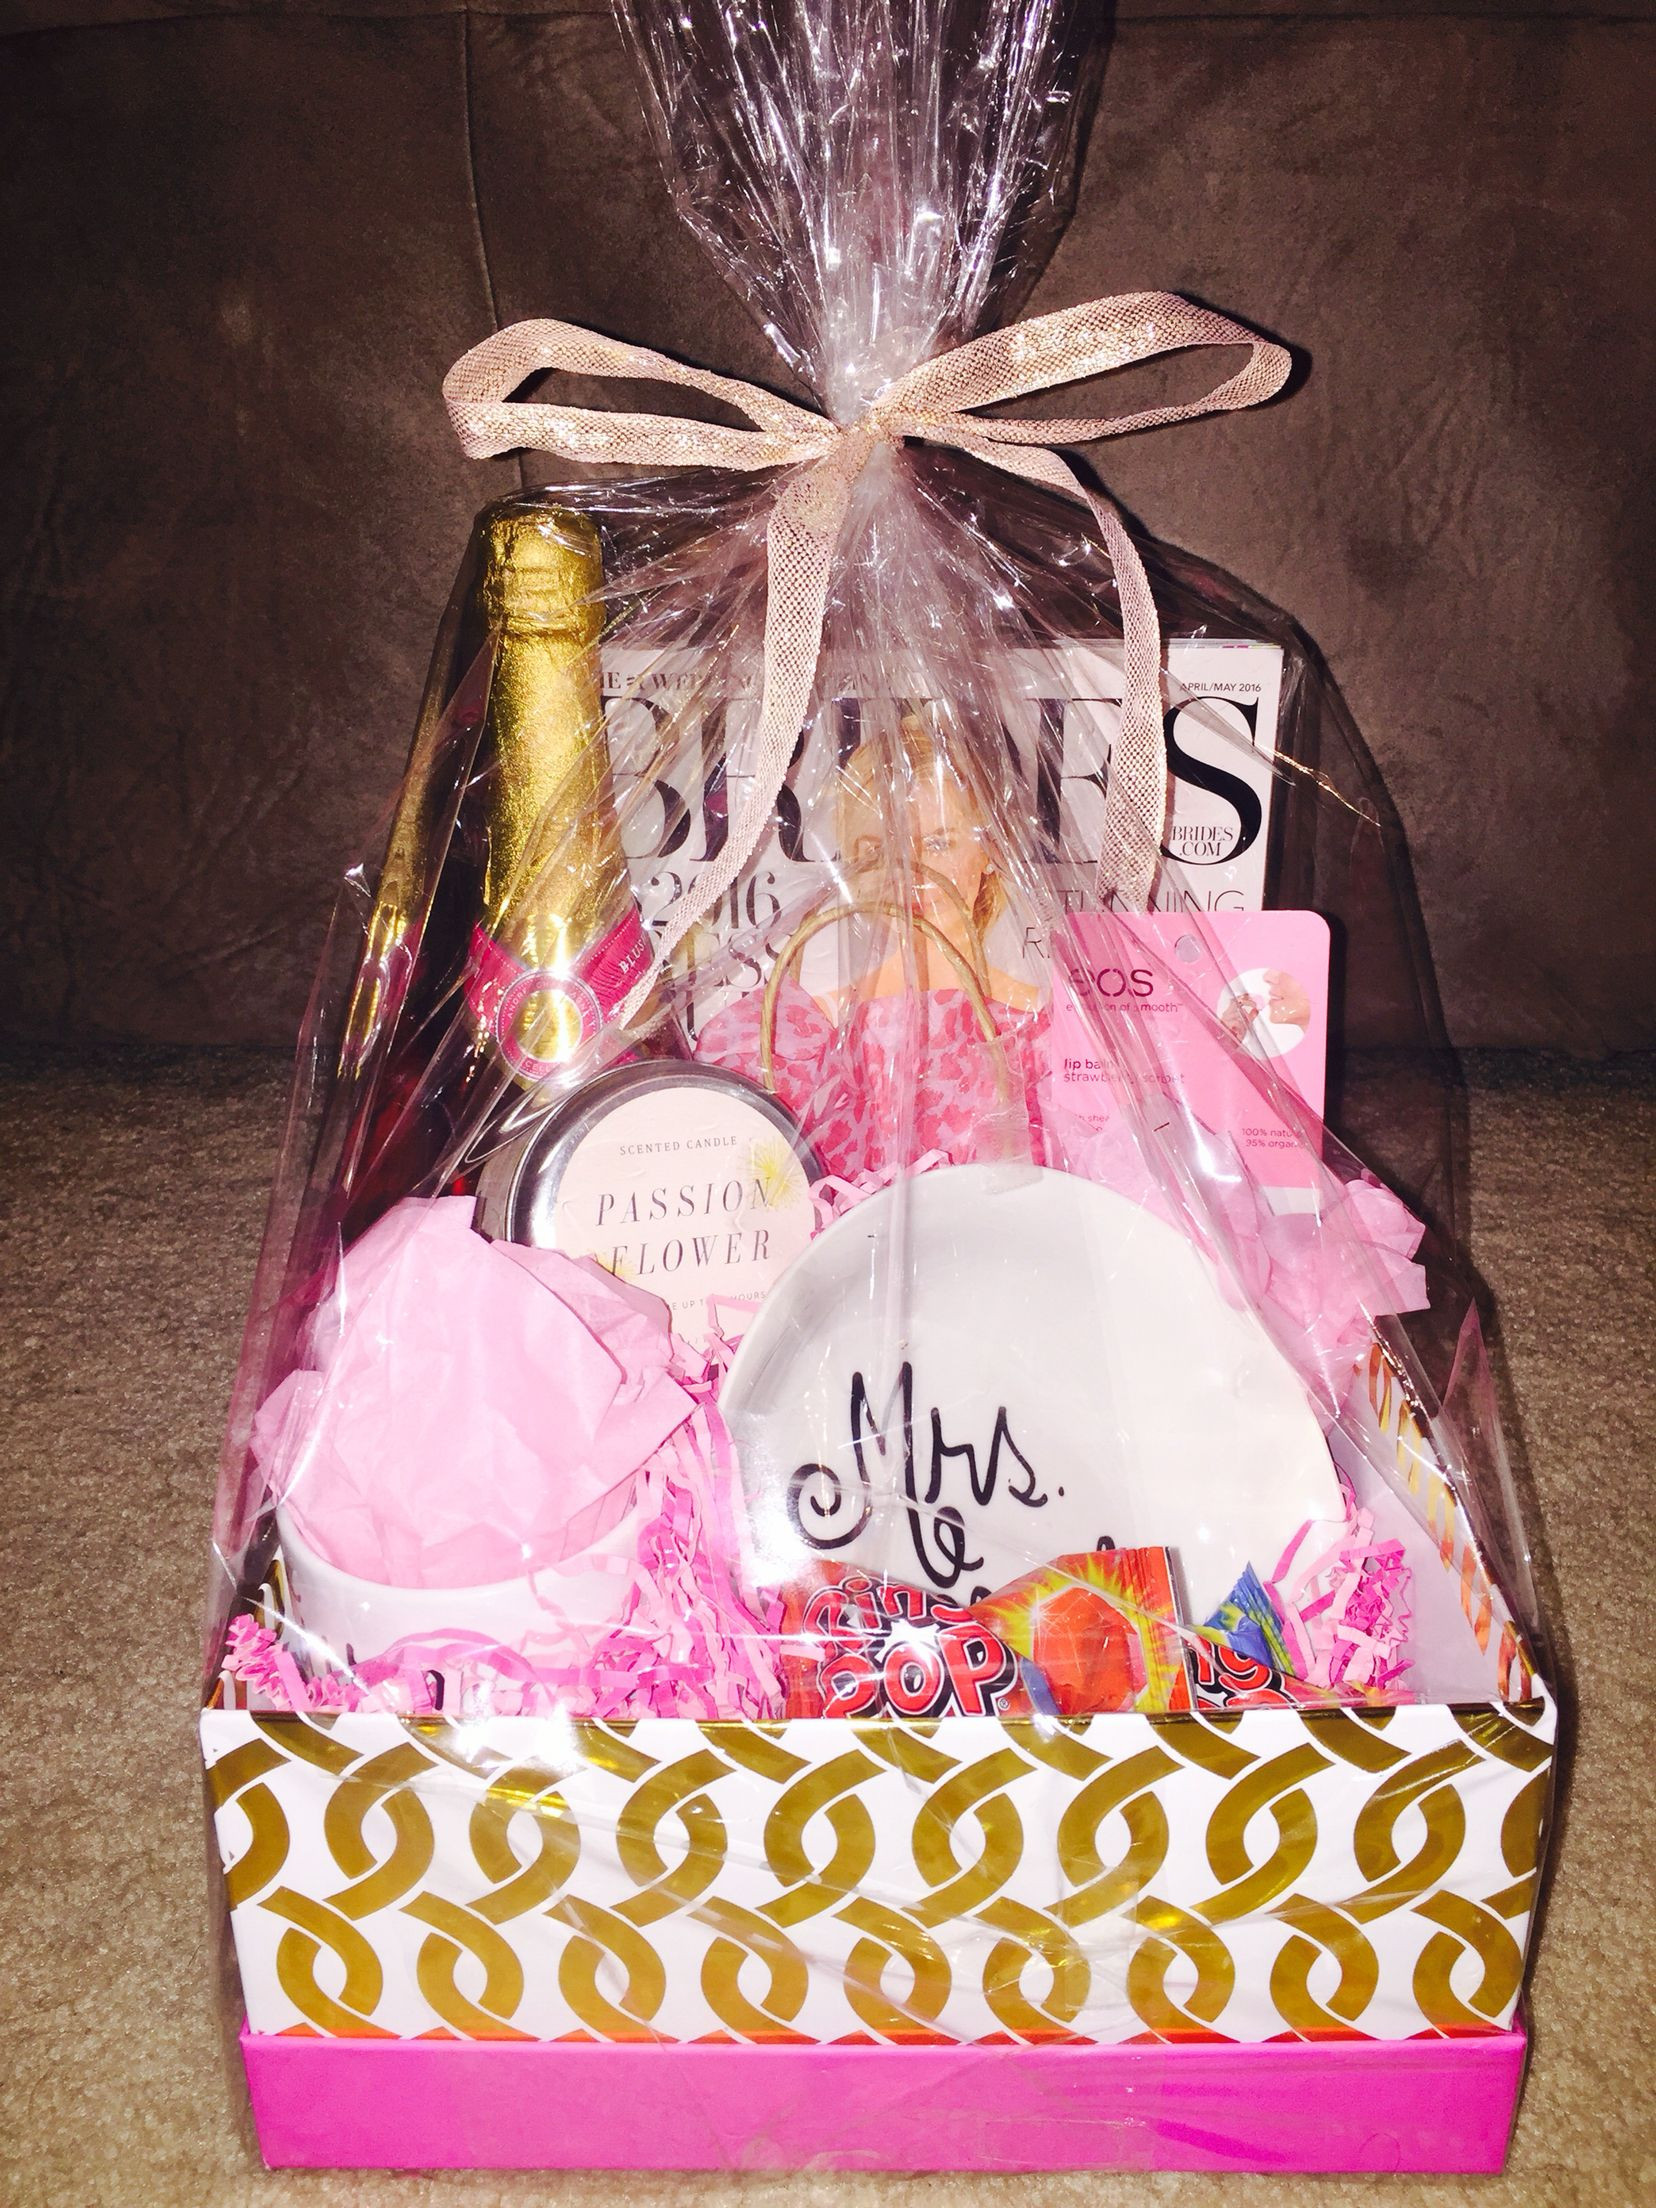 Gift Basket Ideas For Friend
 Engagement t basket I made for my newly engaged best